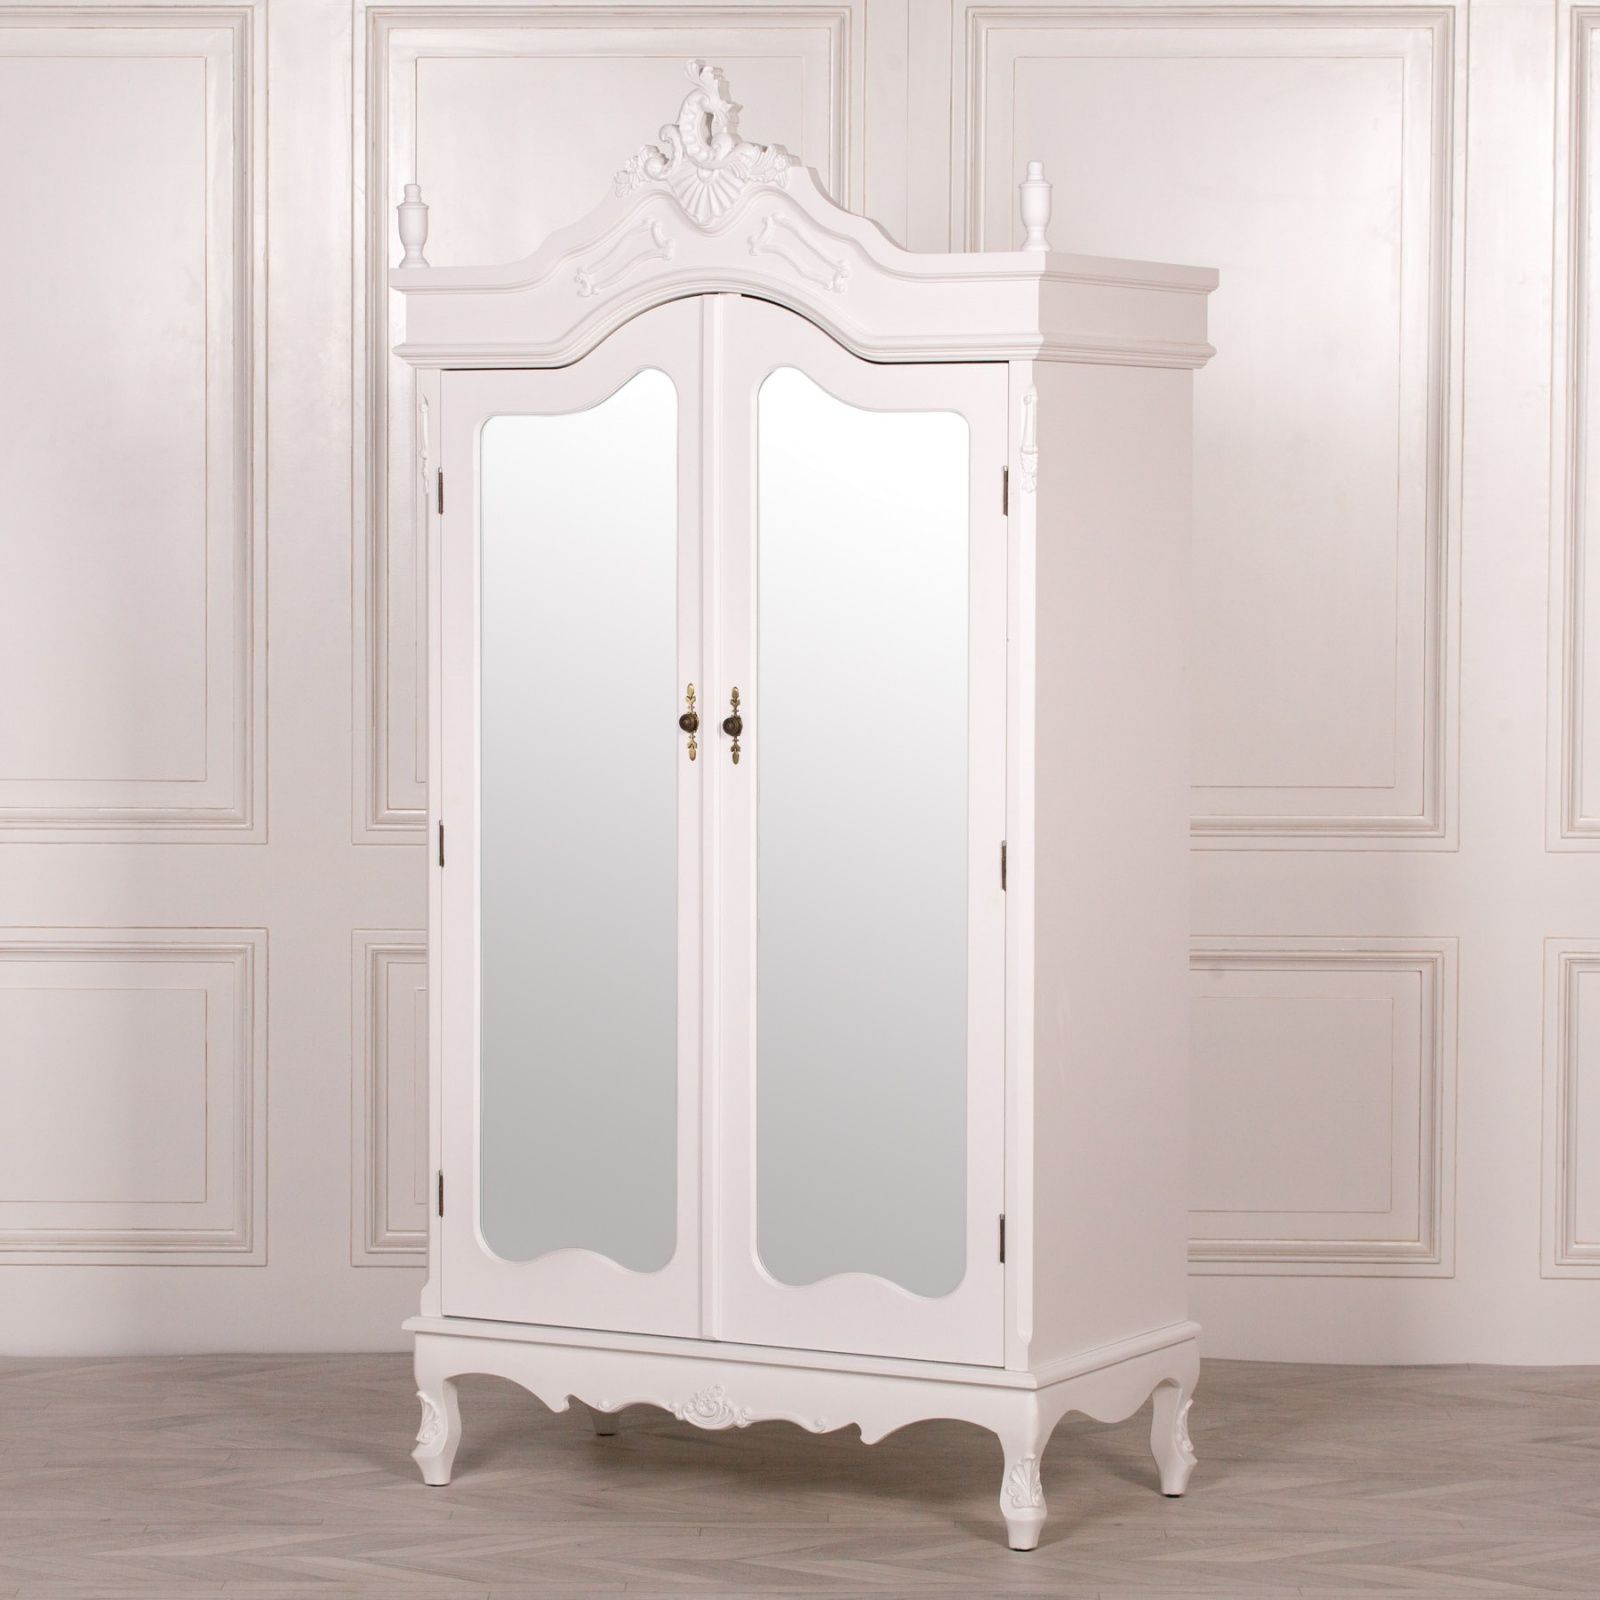 French Style Wardrobe White Mirrored Double Armoire Inside French Armoire Wardrobes (Gallery 7 of 20)